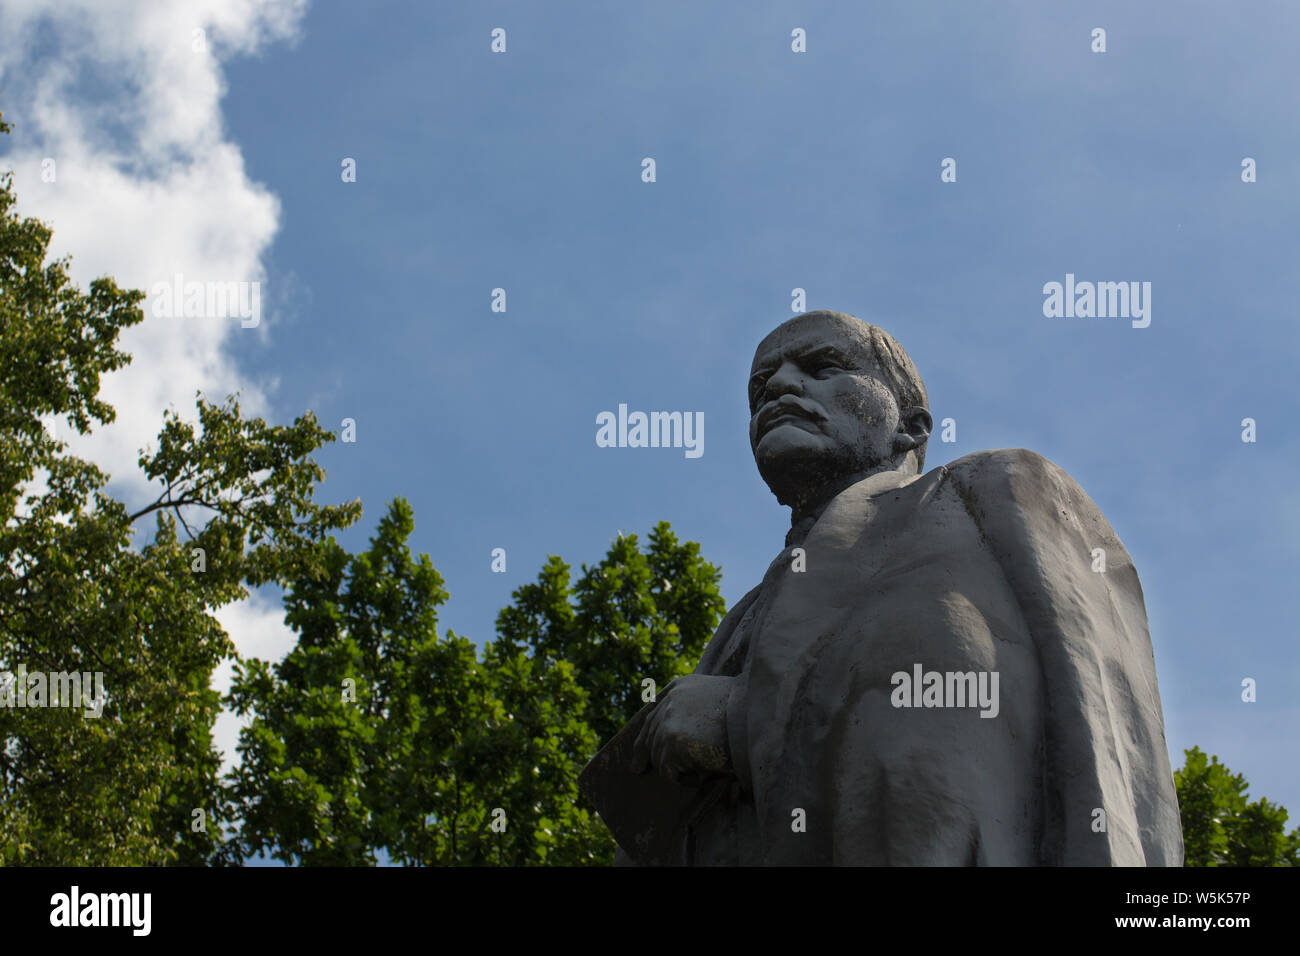 Low angle view of Vladimir Lenin statue against cloudy sky background Stock Photo